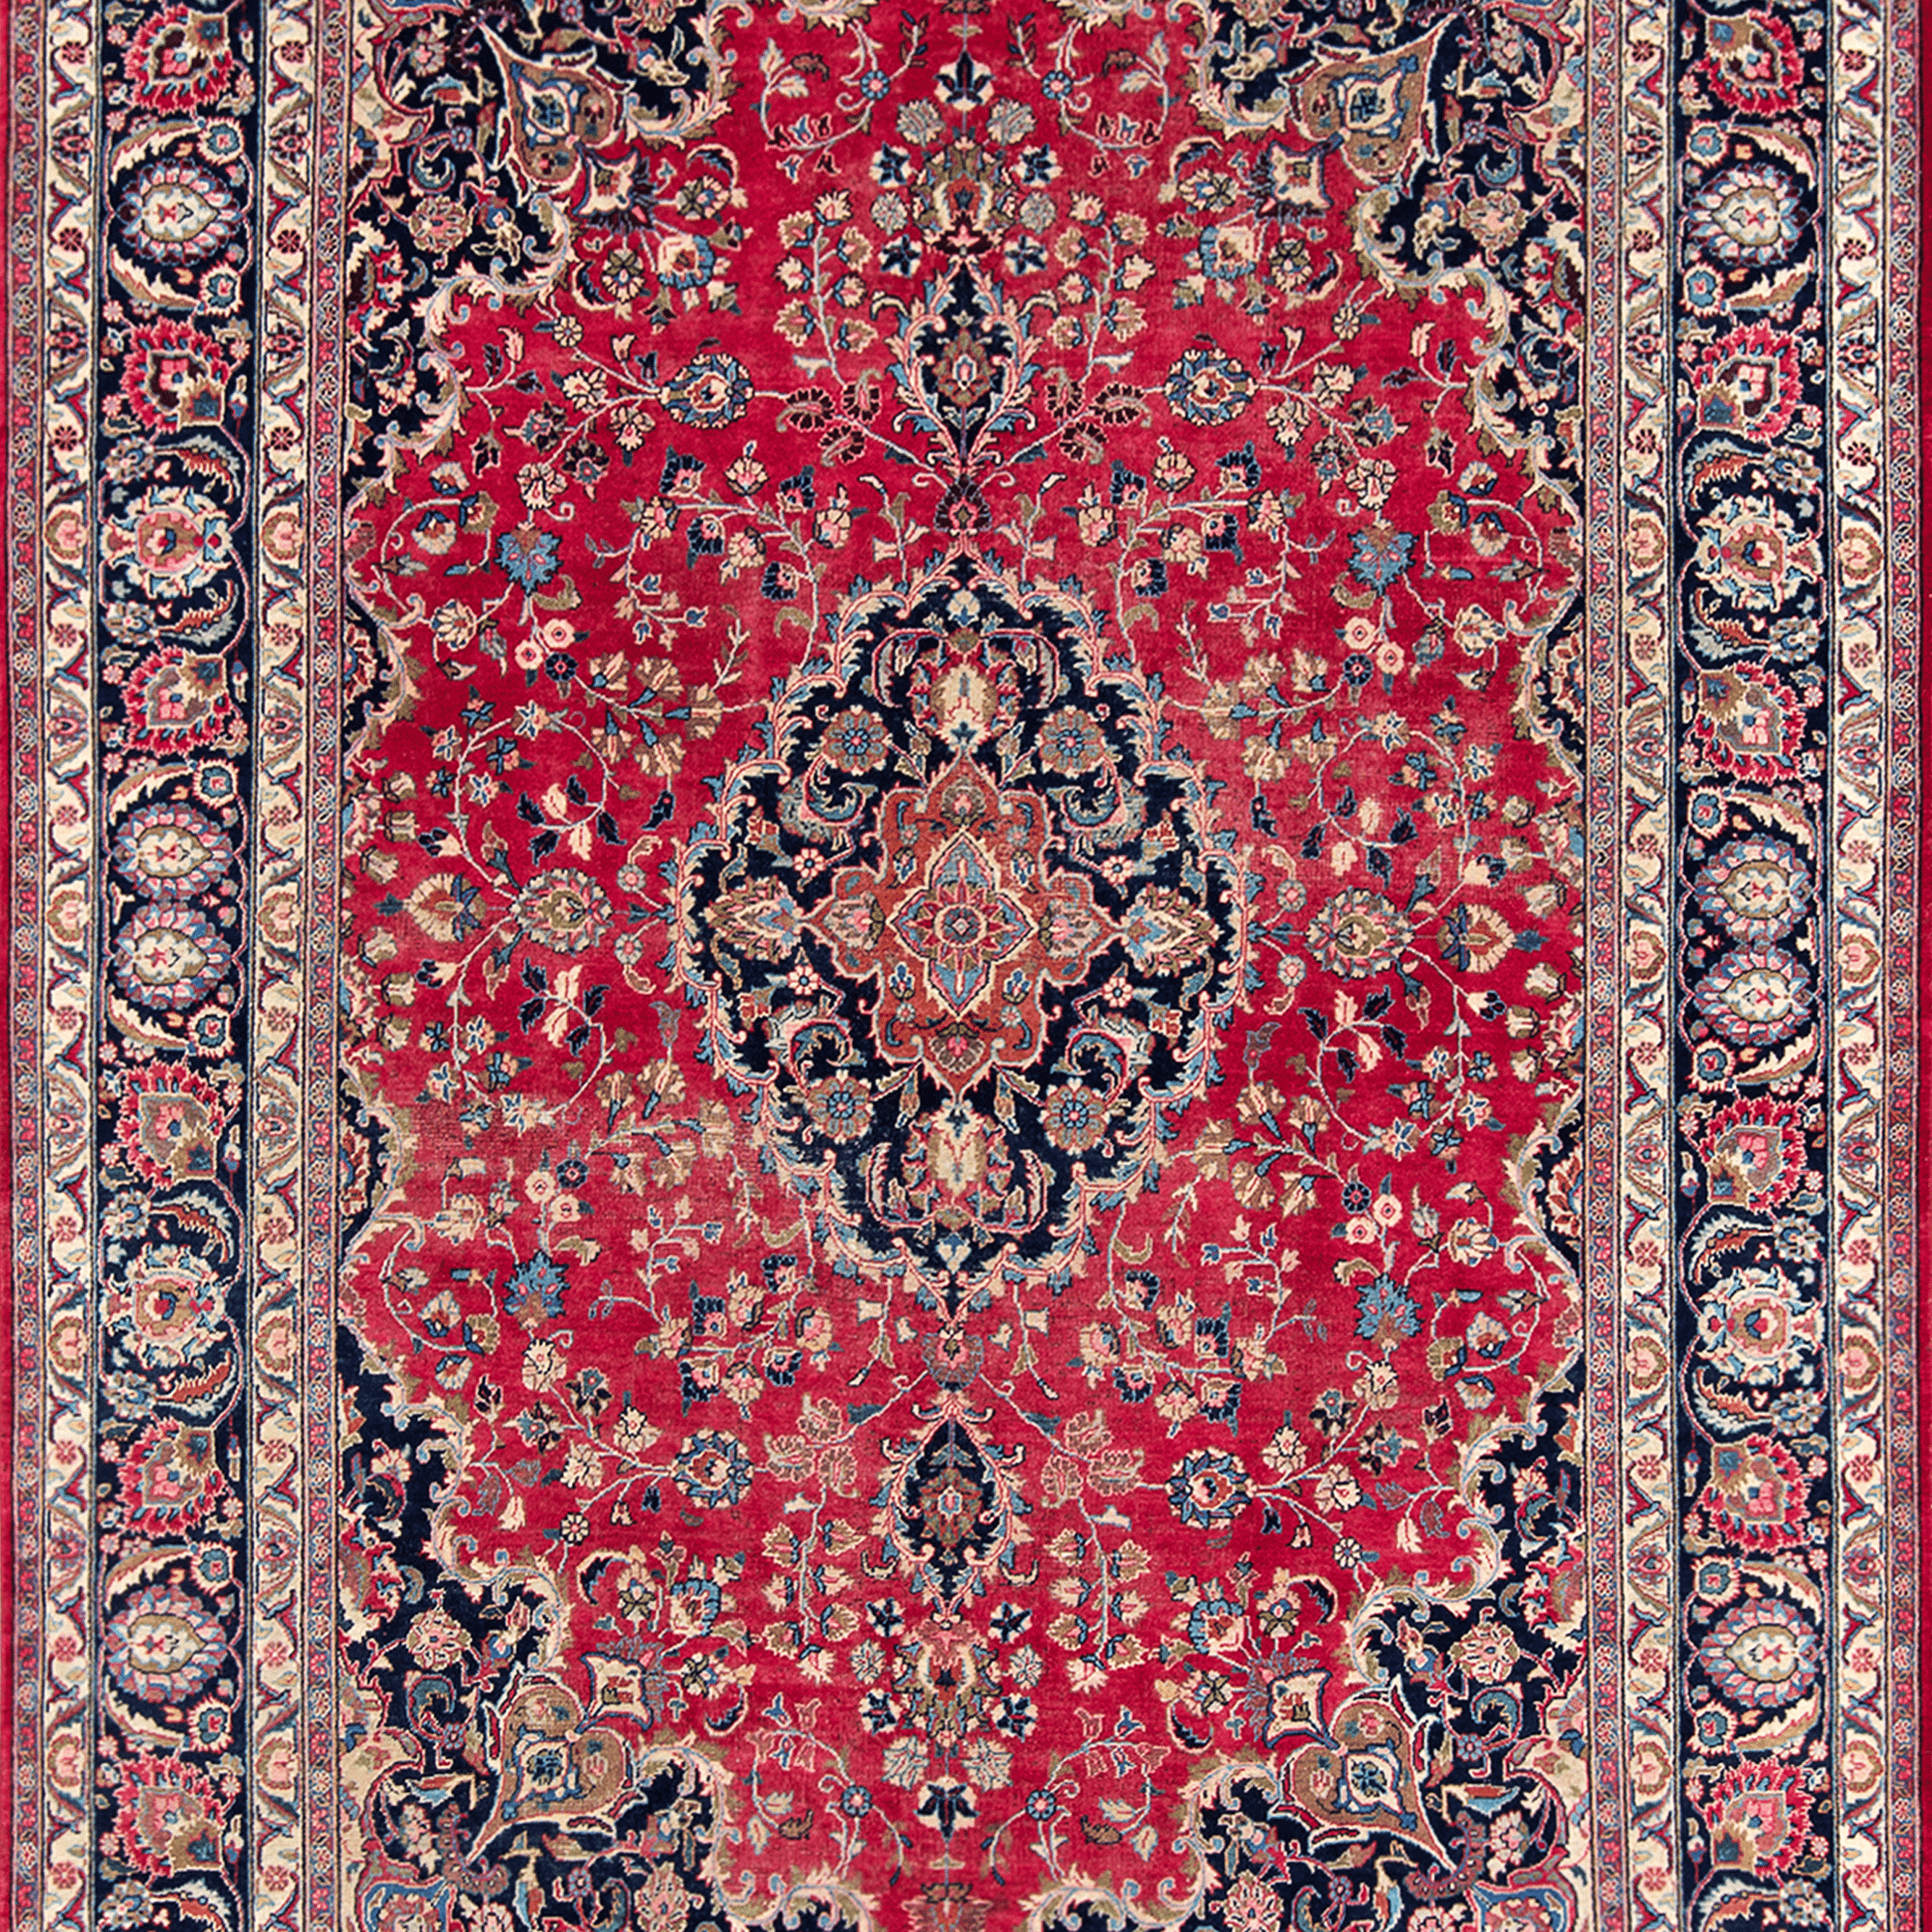 Fine Hand-knotted Wool Vintage Kashan Persian Rug 249cm x 358cm